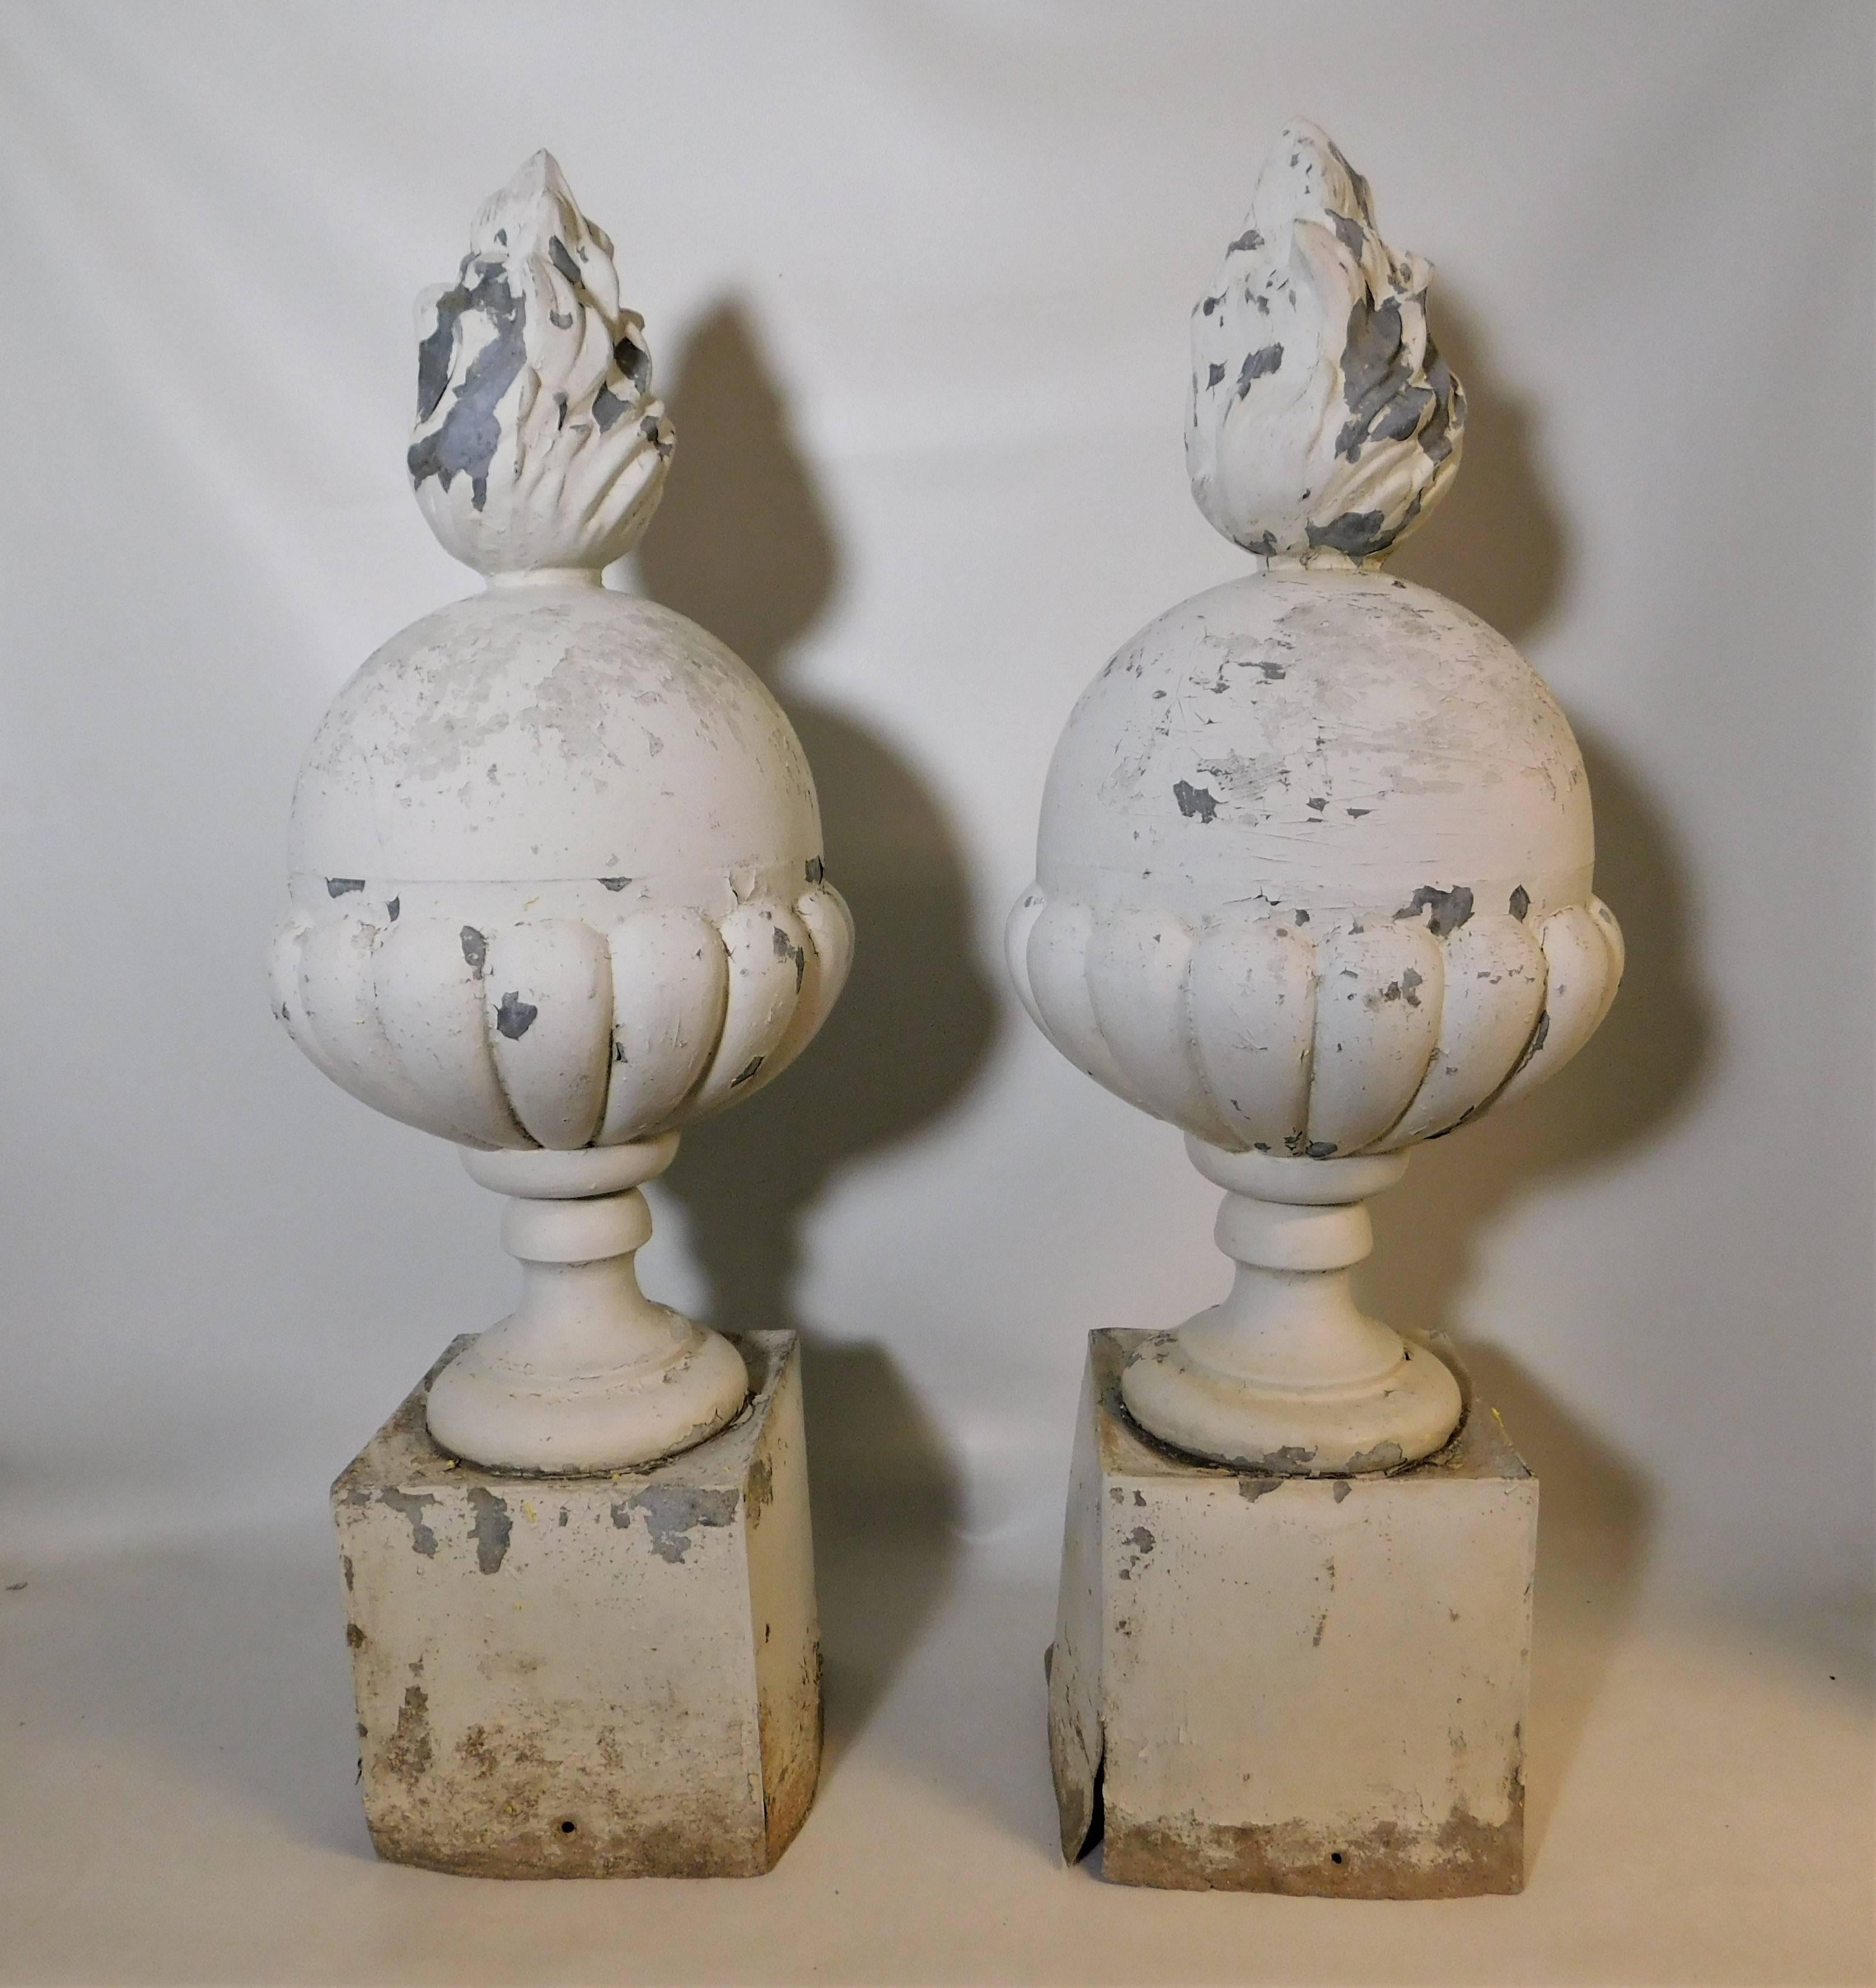 These late 19th century Italian architecturally ornate flame finials are made of zinc coated sheet metal. They were used on a roof or can be used as a landscaping element.